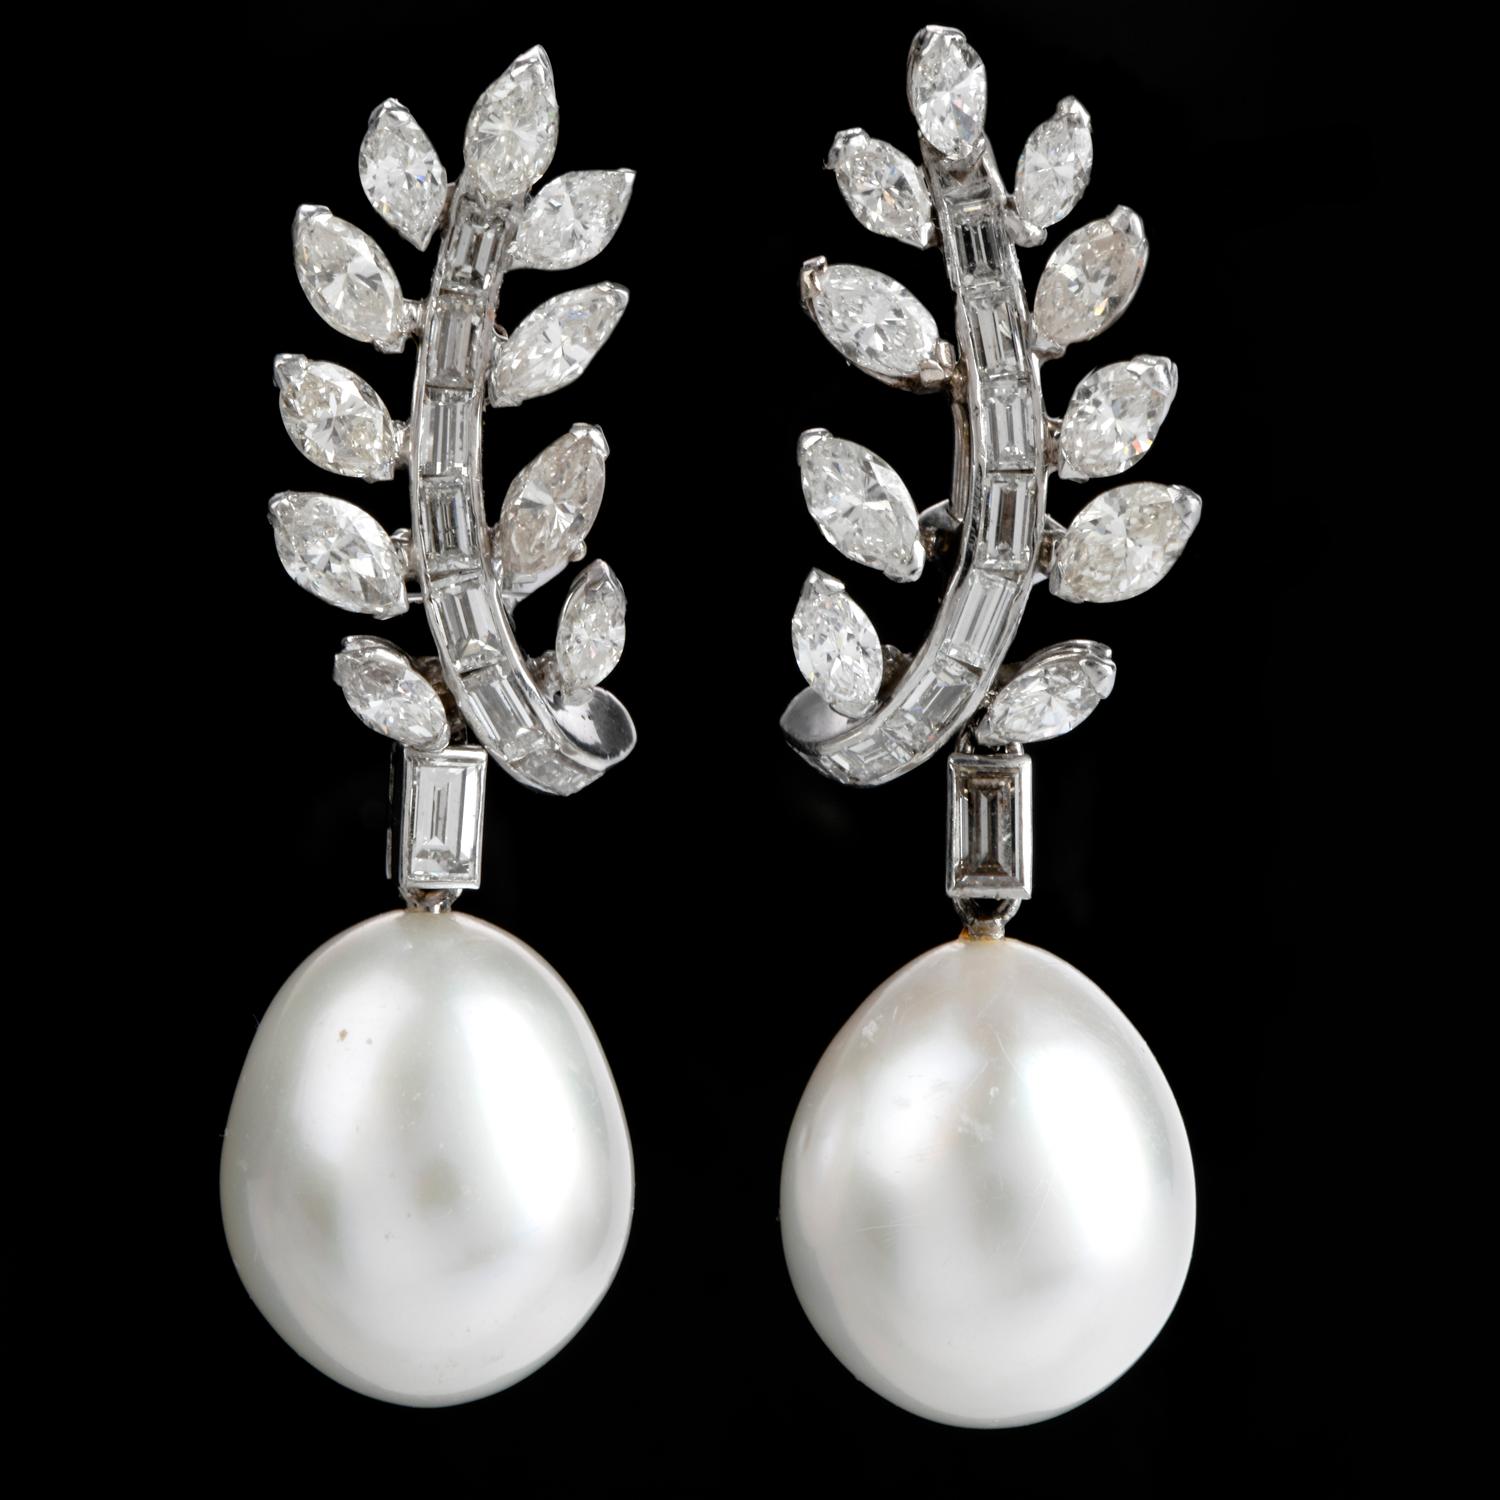 These alluring vintage drop earrings are crafted in solid platinum, weighing approx. 20.4 grams.

These earrings expose a pair of 16 mm south sea pearls, of white with pinkish-cream hue' color, attached dangle from baguette and marquise shape